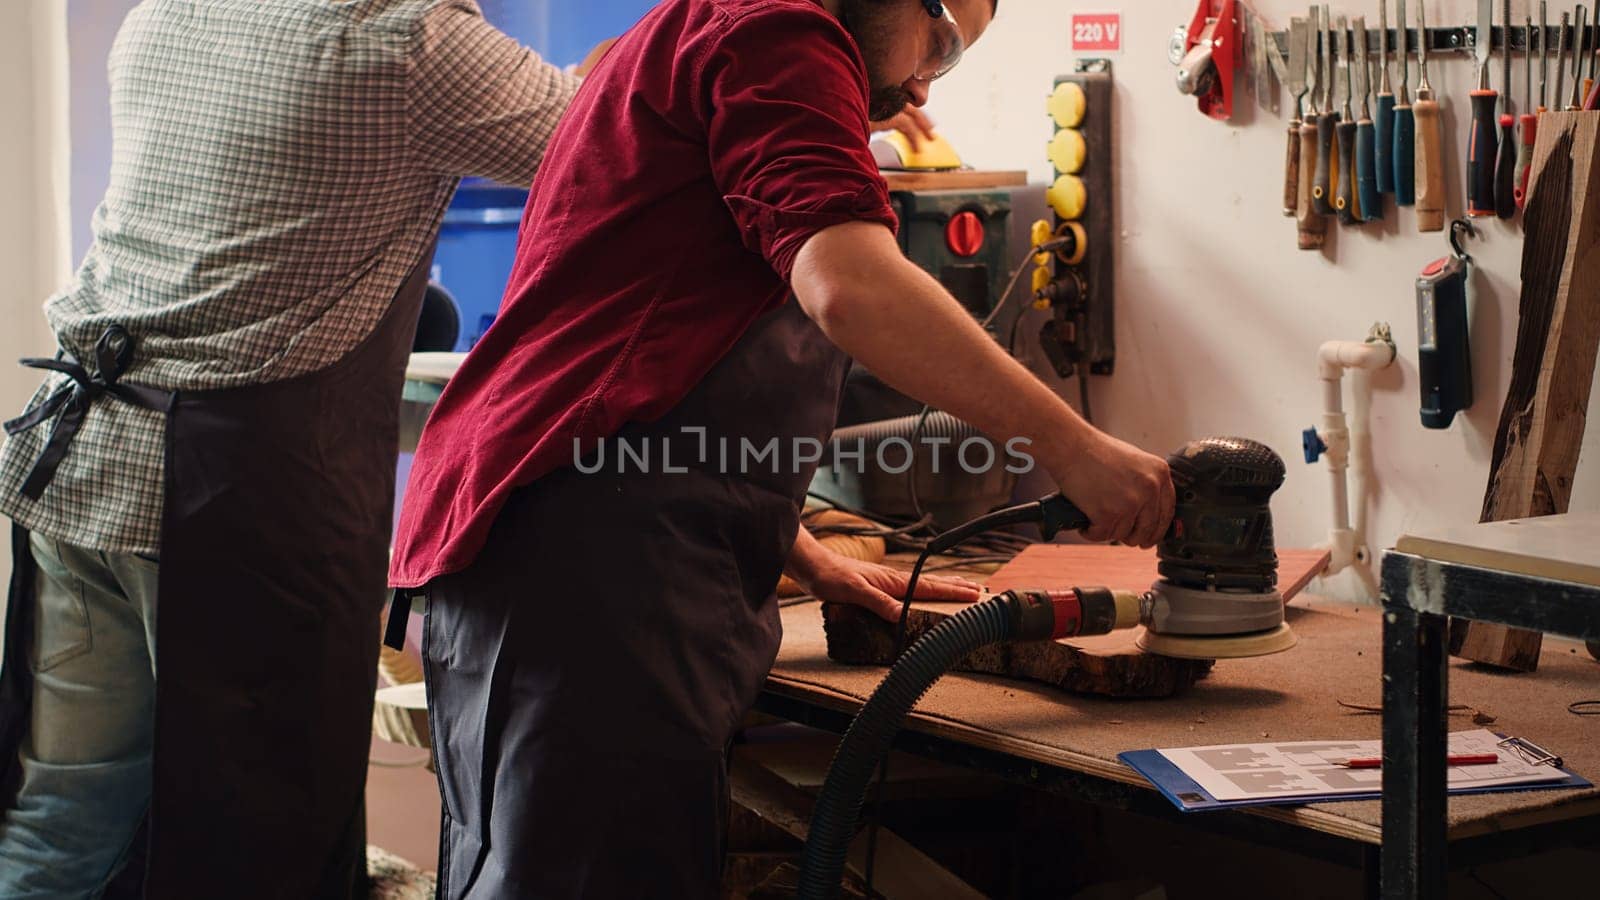 Craftsperson at work consulting blueprint and using orbital sander with sandpaper on lumber. Woodworking expert in carpentry shop uses angle grinder on wood after checking schematics, camera A